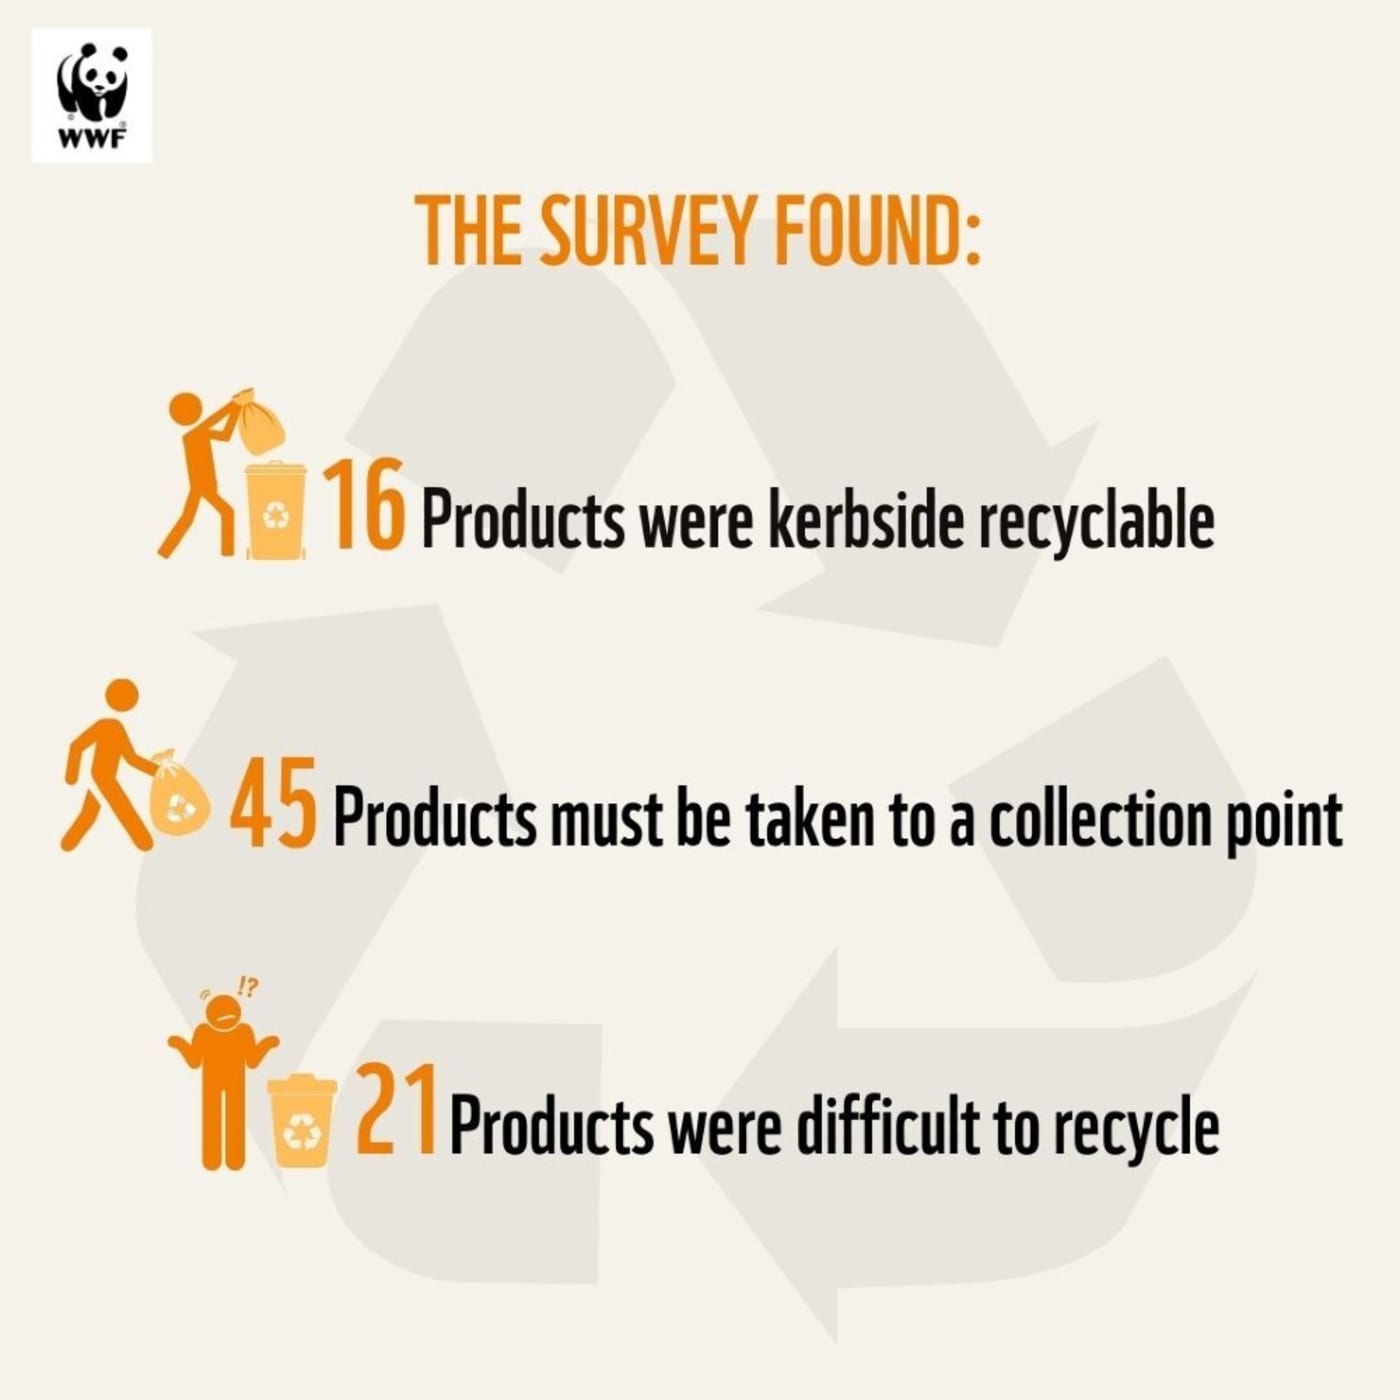 The survey found only 16 products (19.5%) were entirely kerbside recyclable, 46 (56%) must be taken to a collection point, and 20 (24%) were difficult to recycle, with many examples of over-packaging and bad design